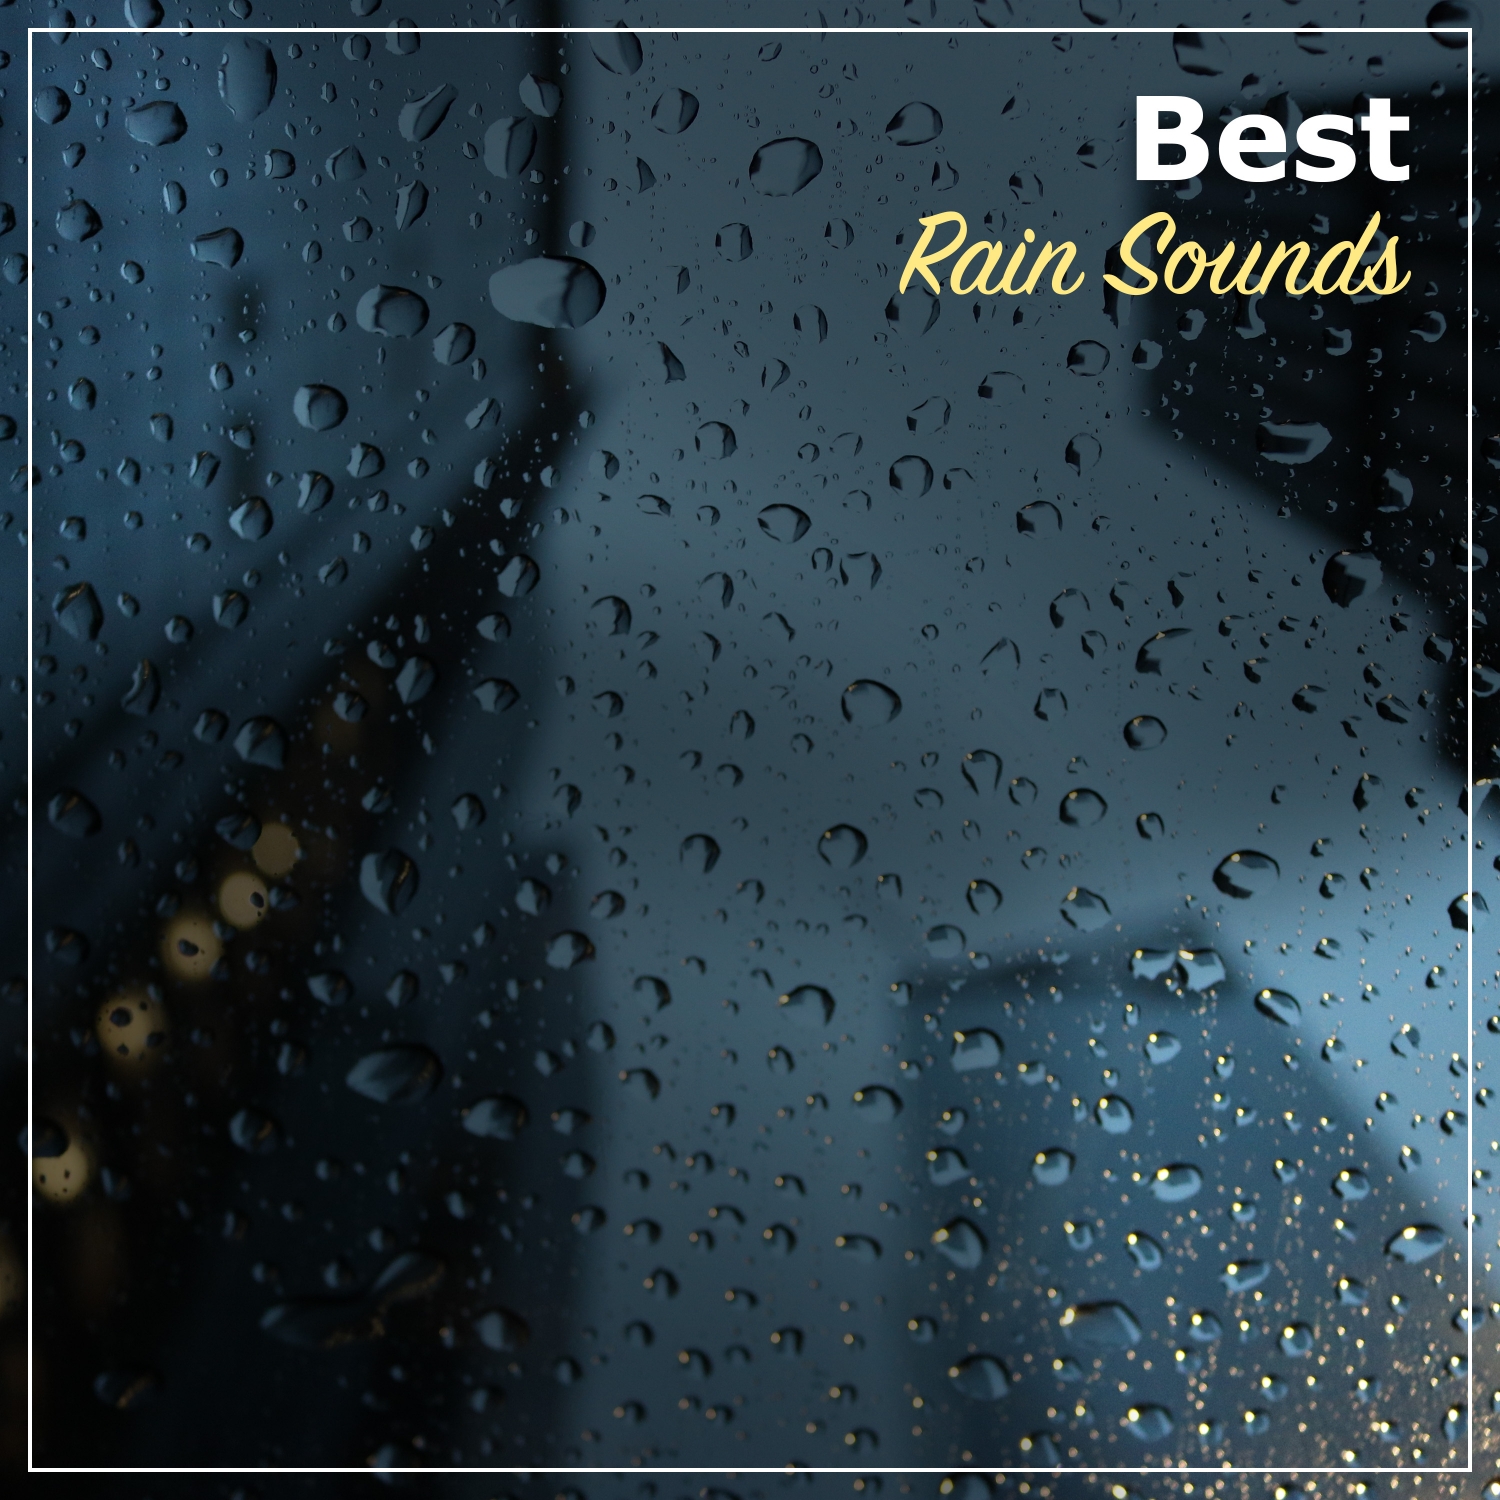 21  Tracks of The Best Rain Sounds Ever